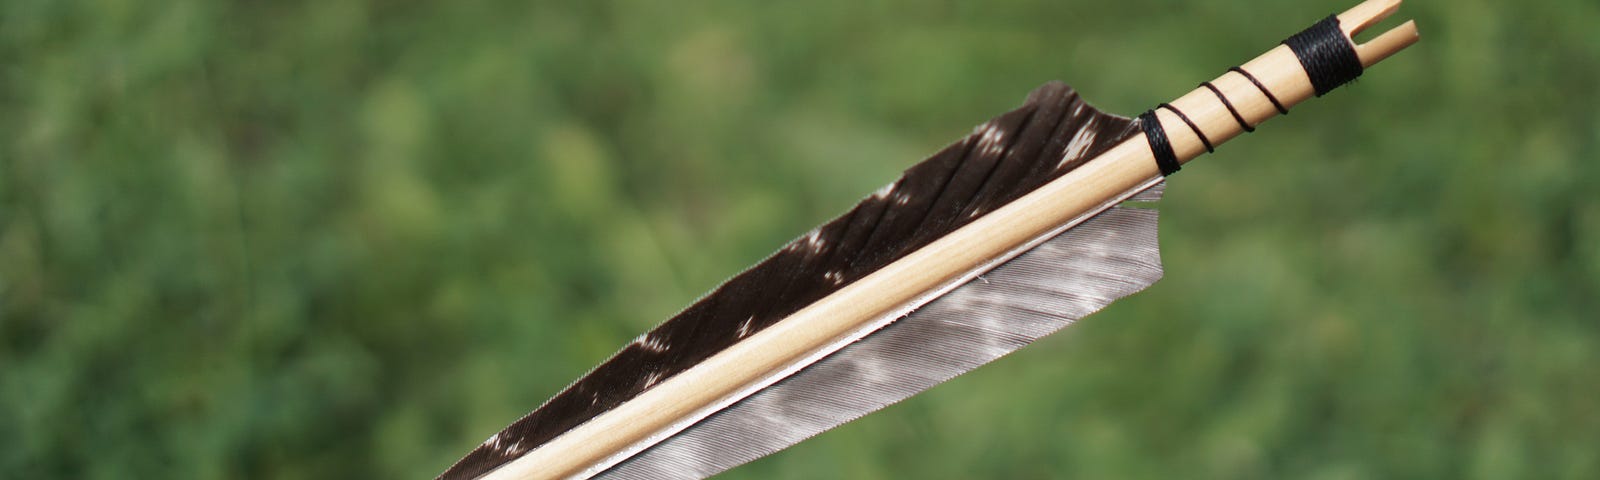 Photograph of an arrow as used in archery